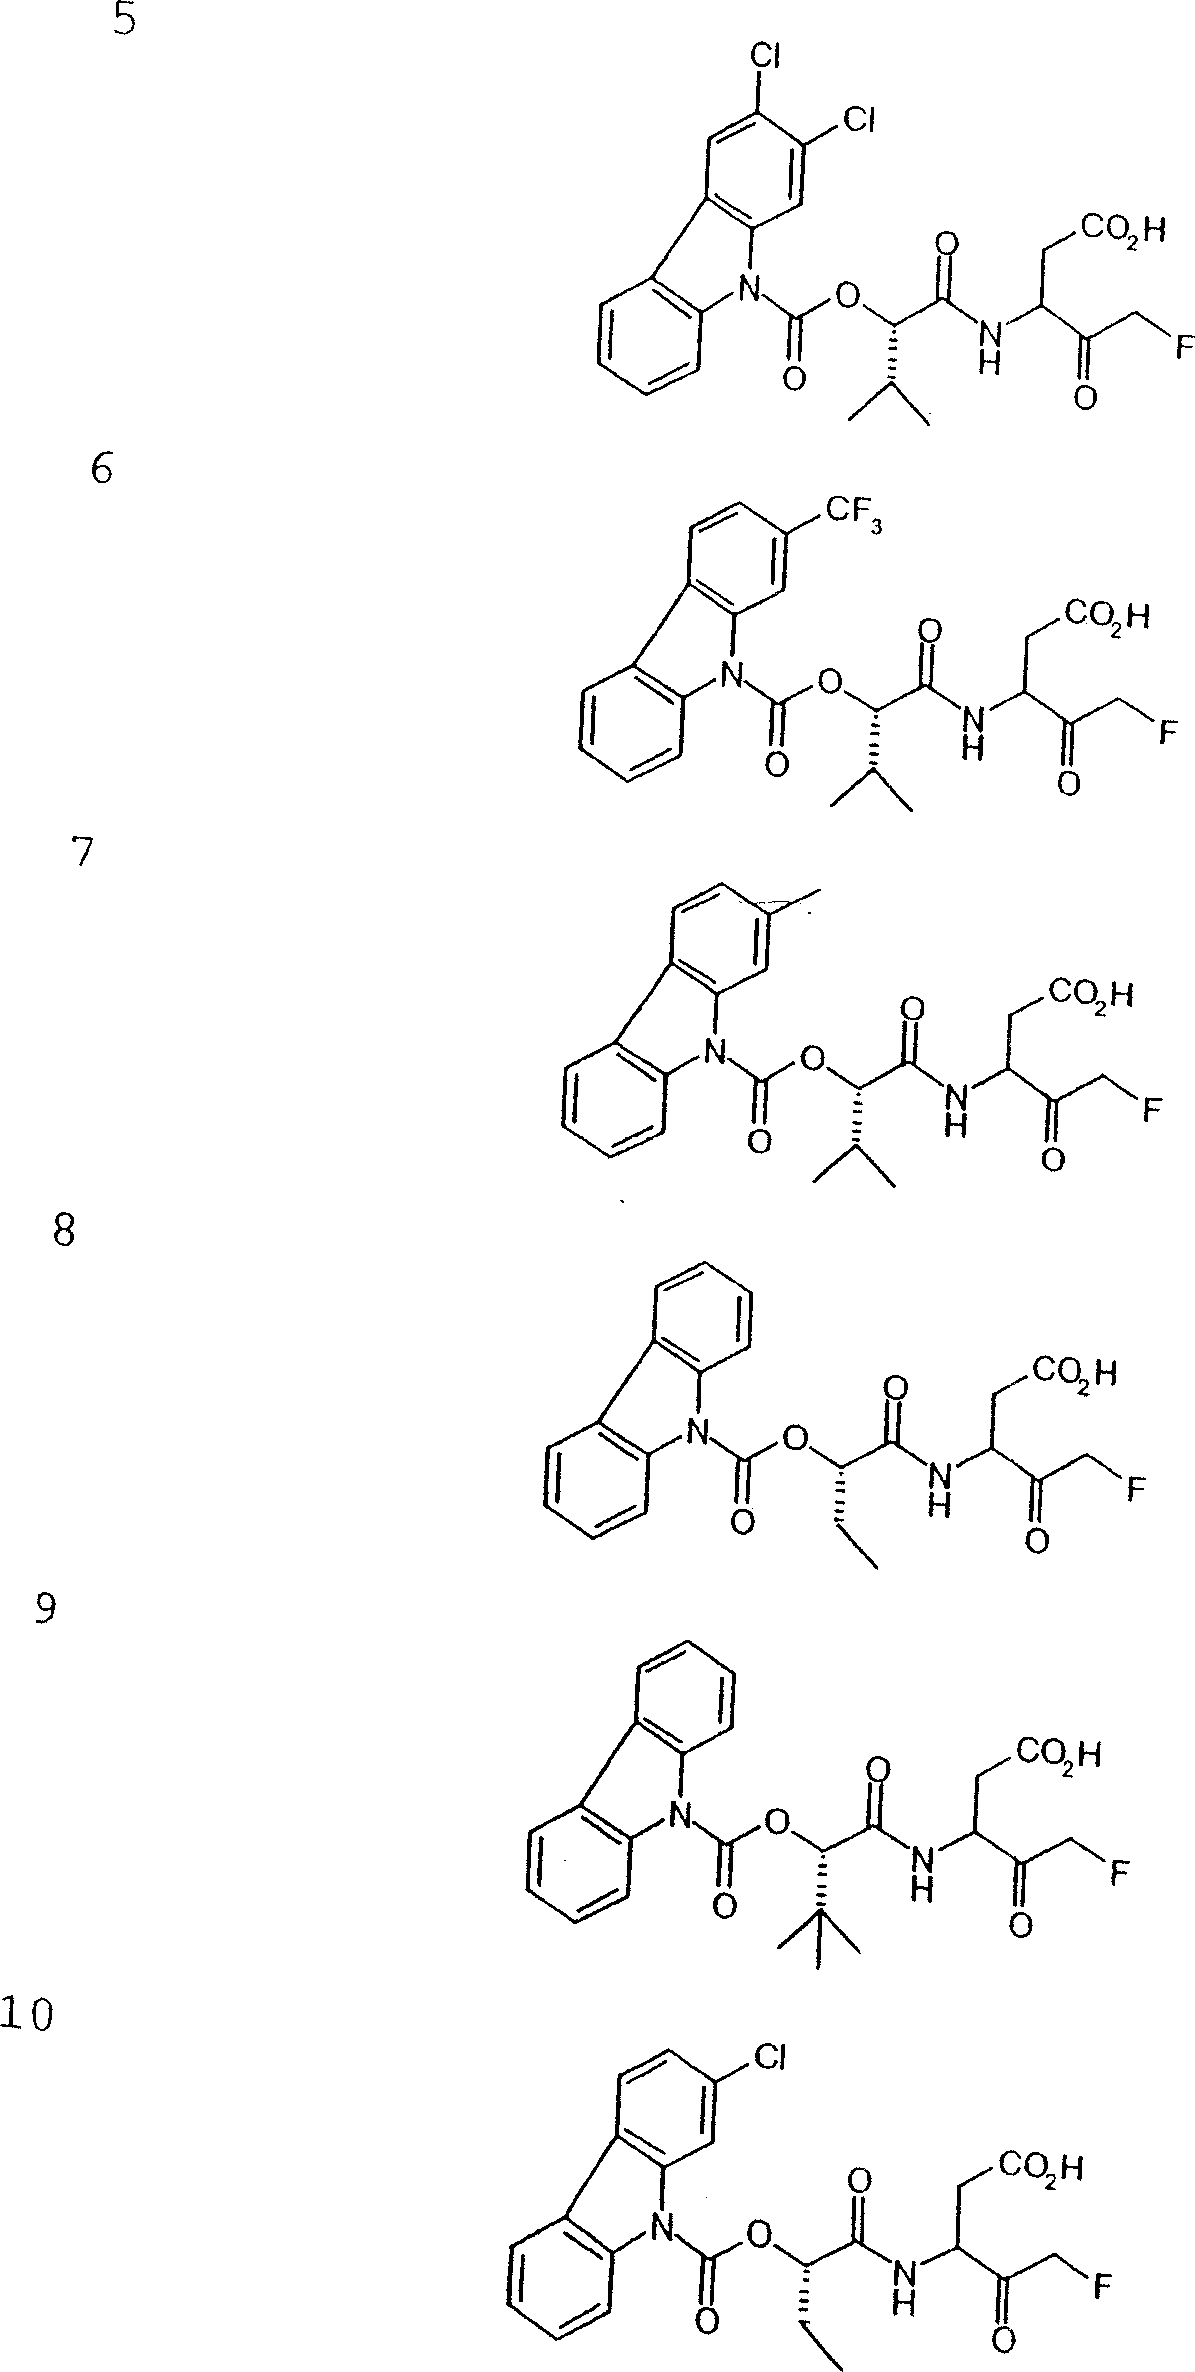 Carbamate aspartic acid specific cysteine proteinase inhibitors and uses thereof